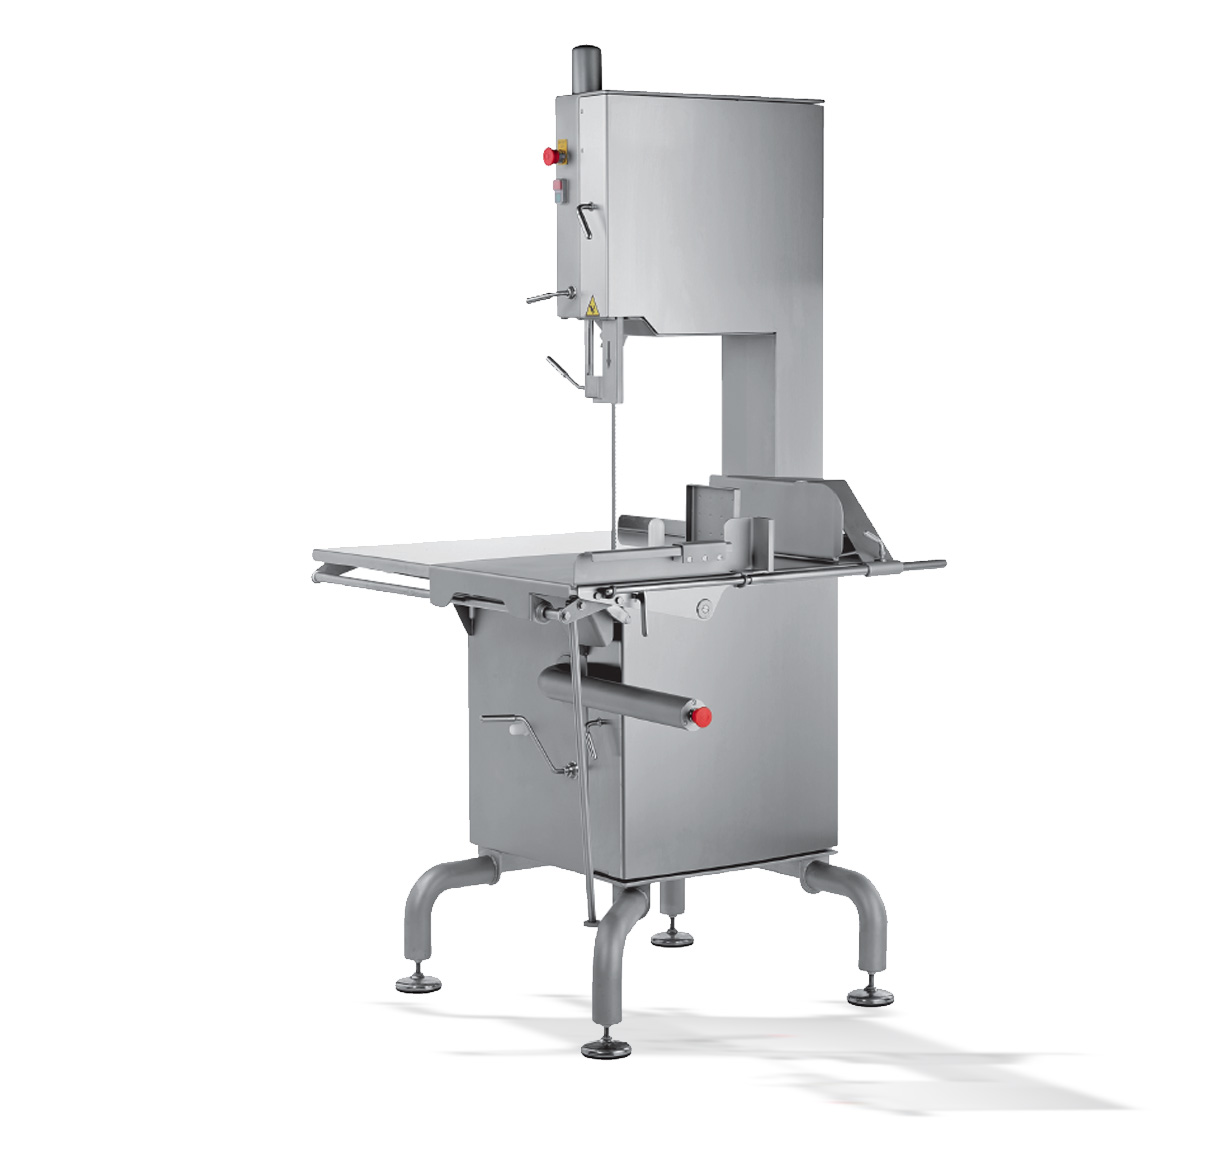 SX400 Series Meat Saws